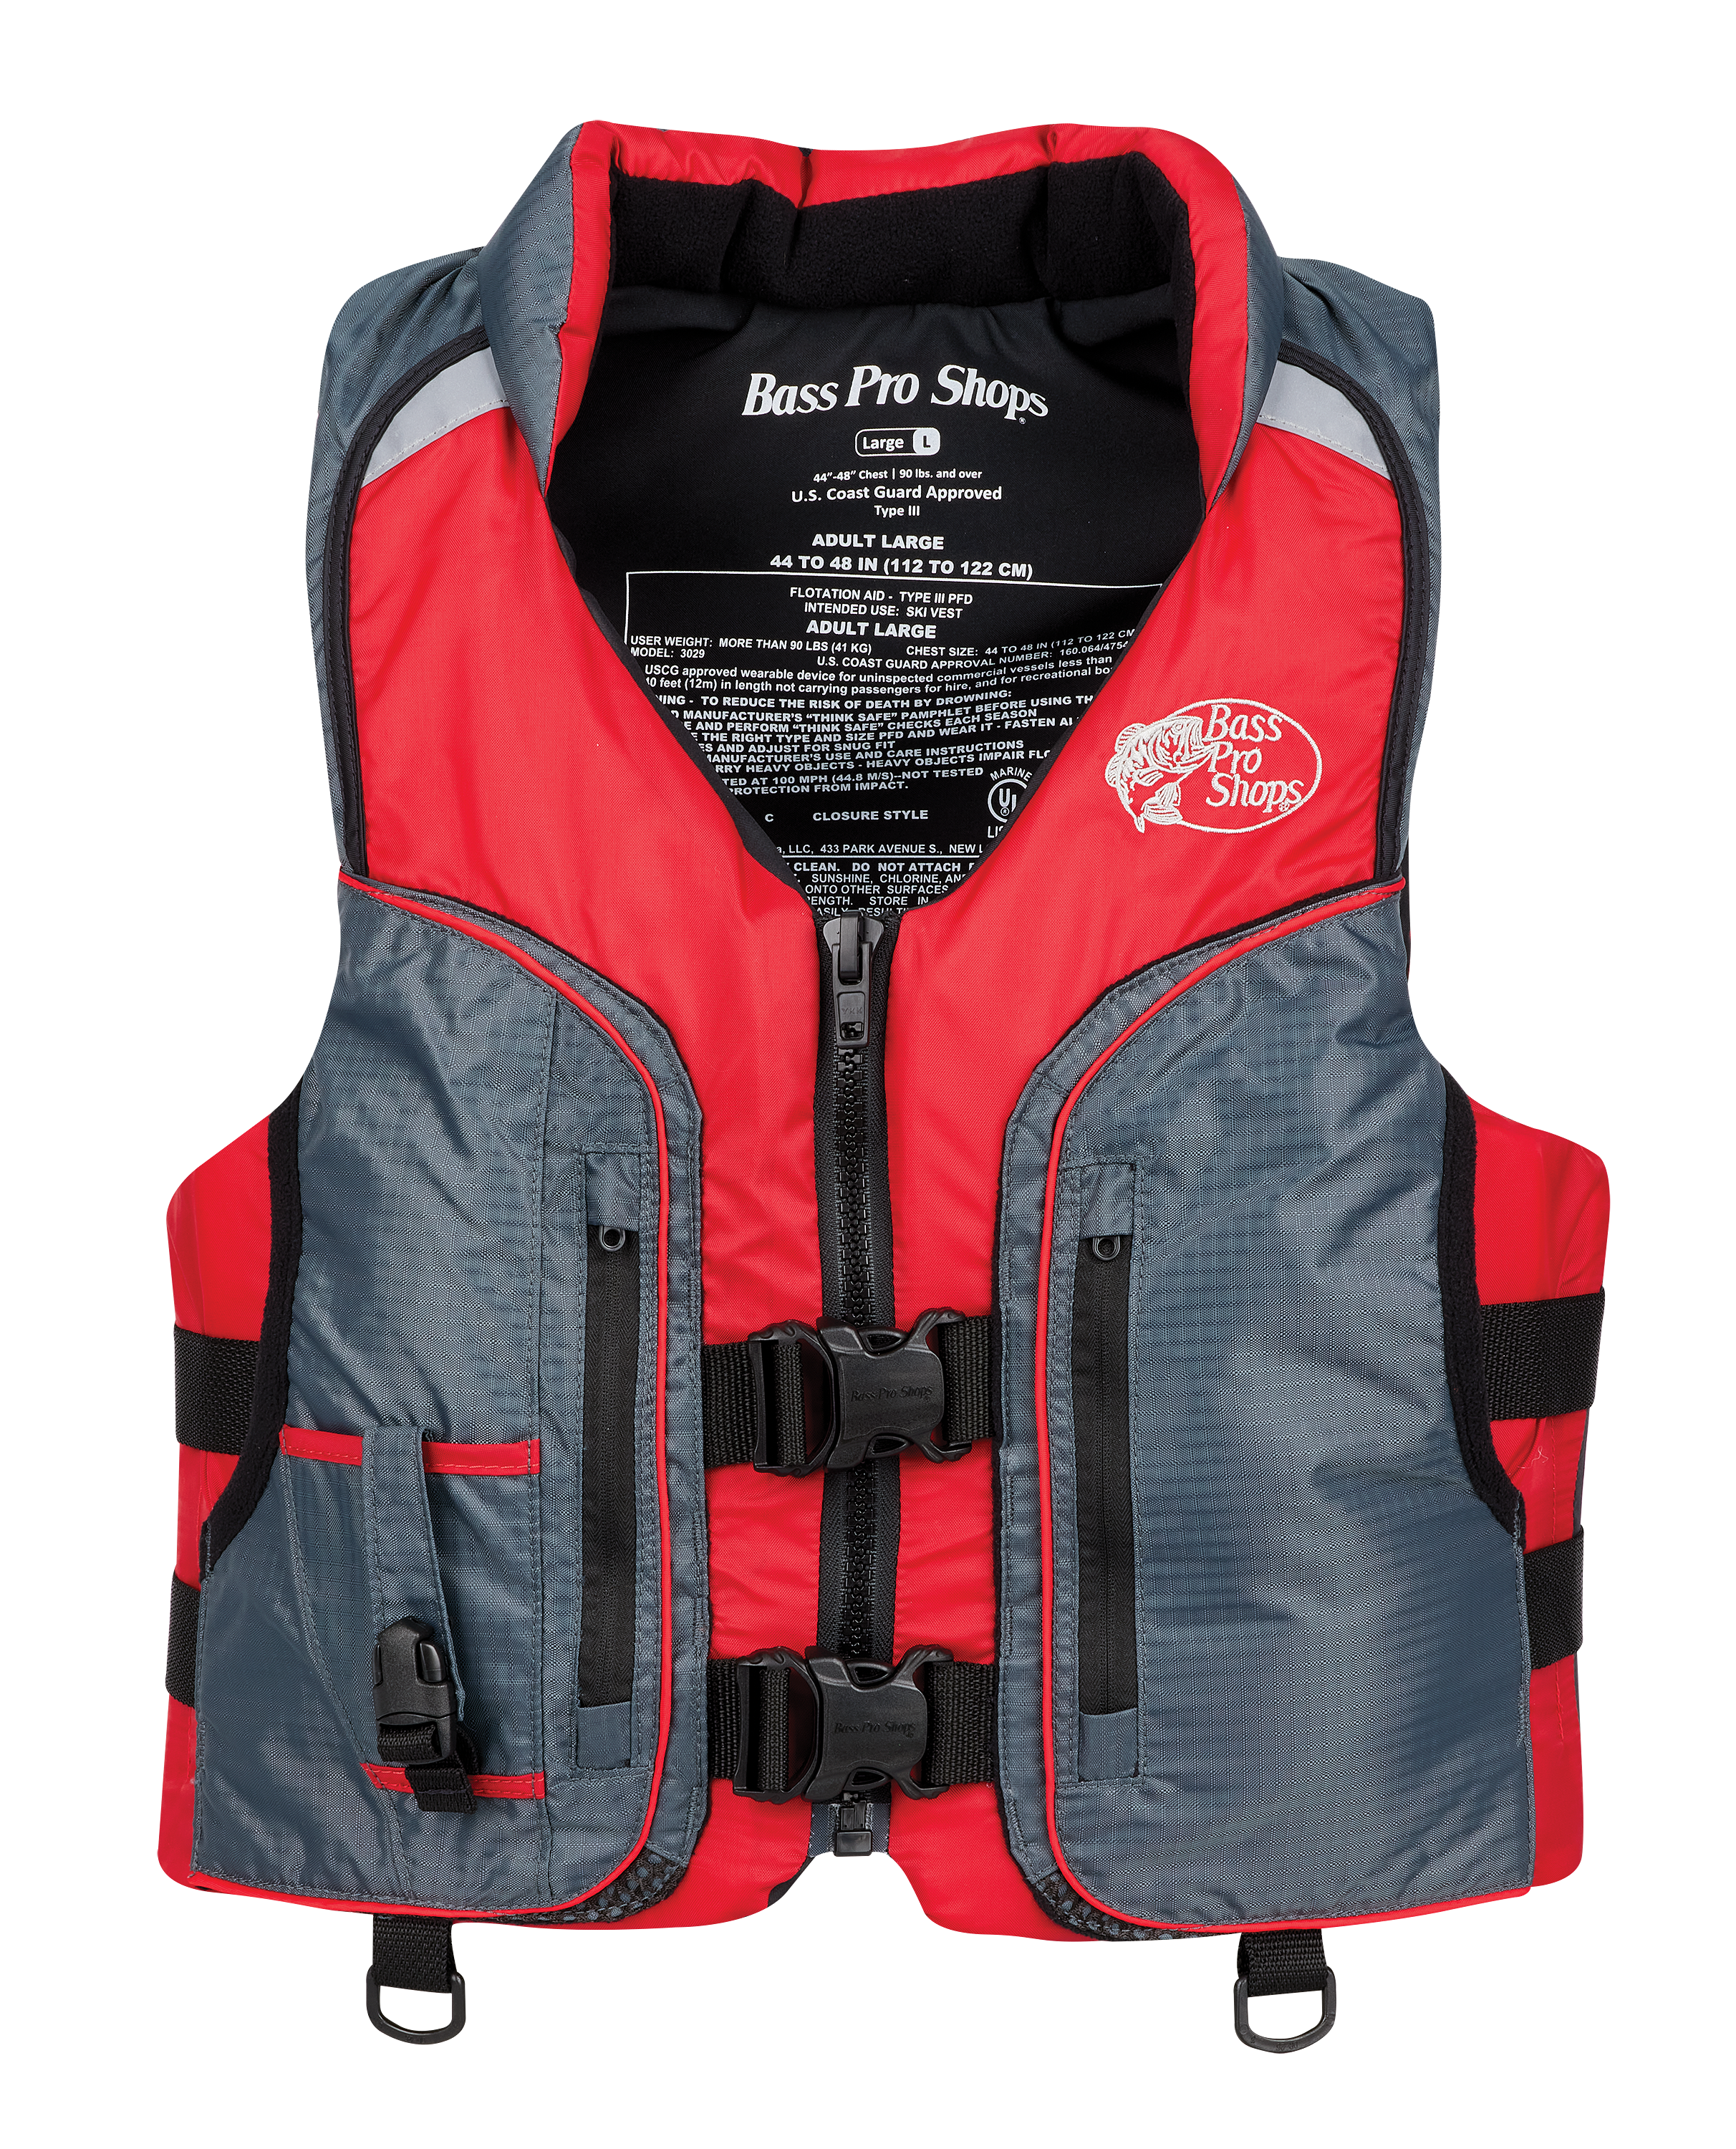 Deluxe Bass Pro Fishing Vest, Top Of the line, 8 Pockets, Breathable, Model  1800